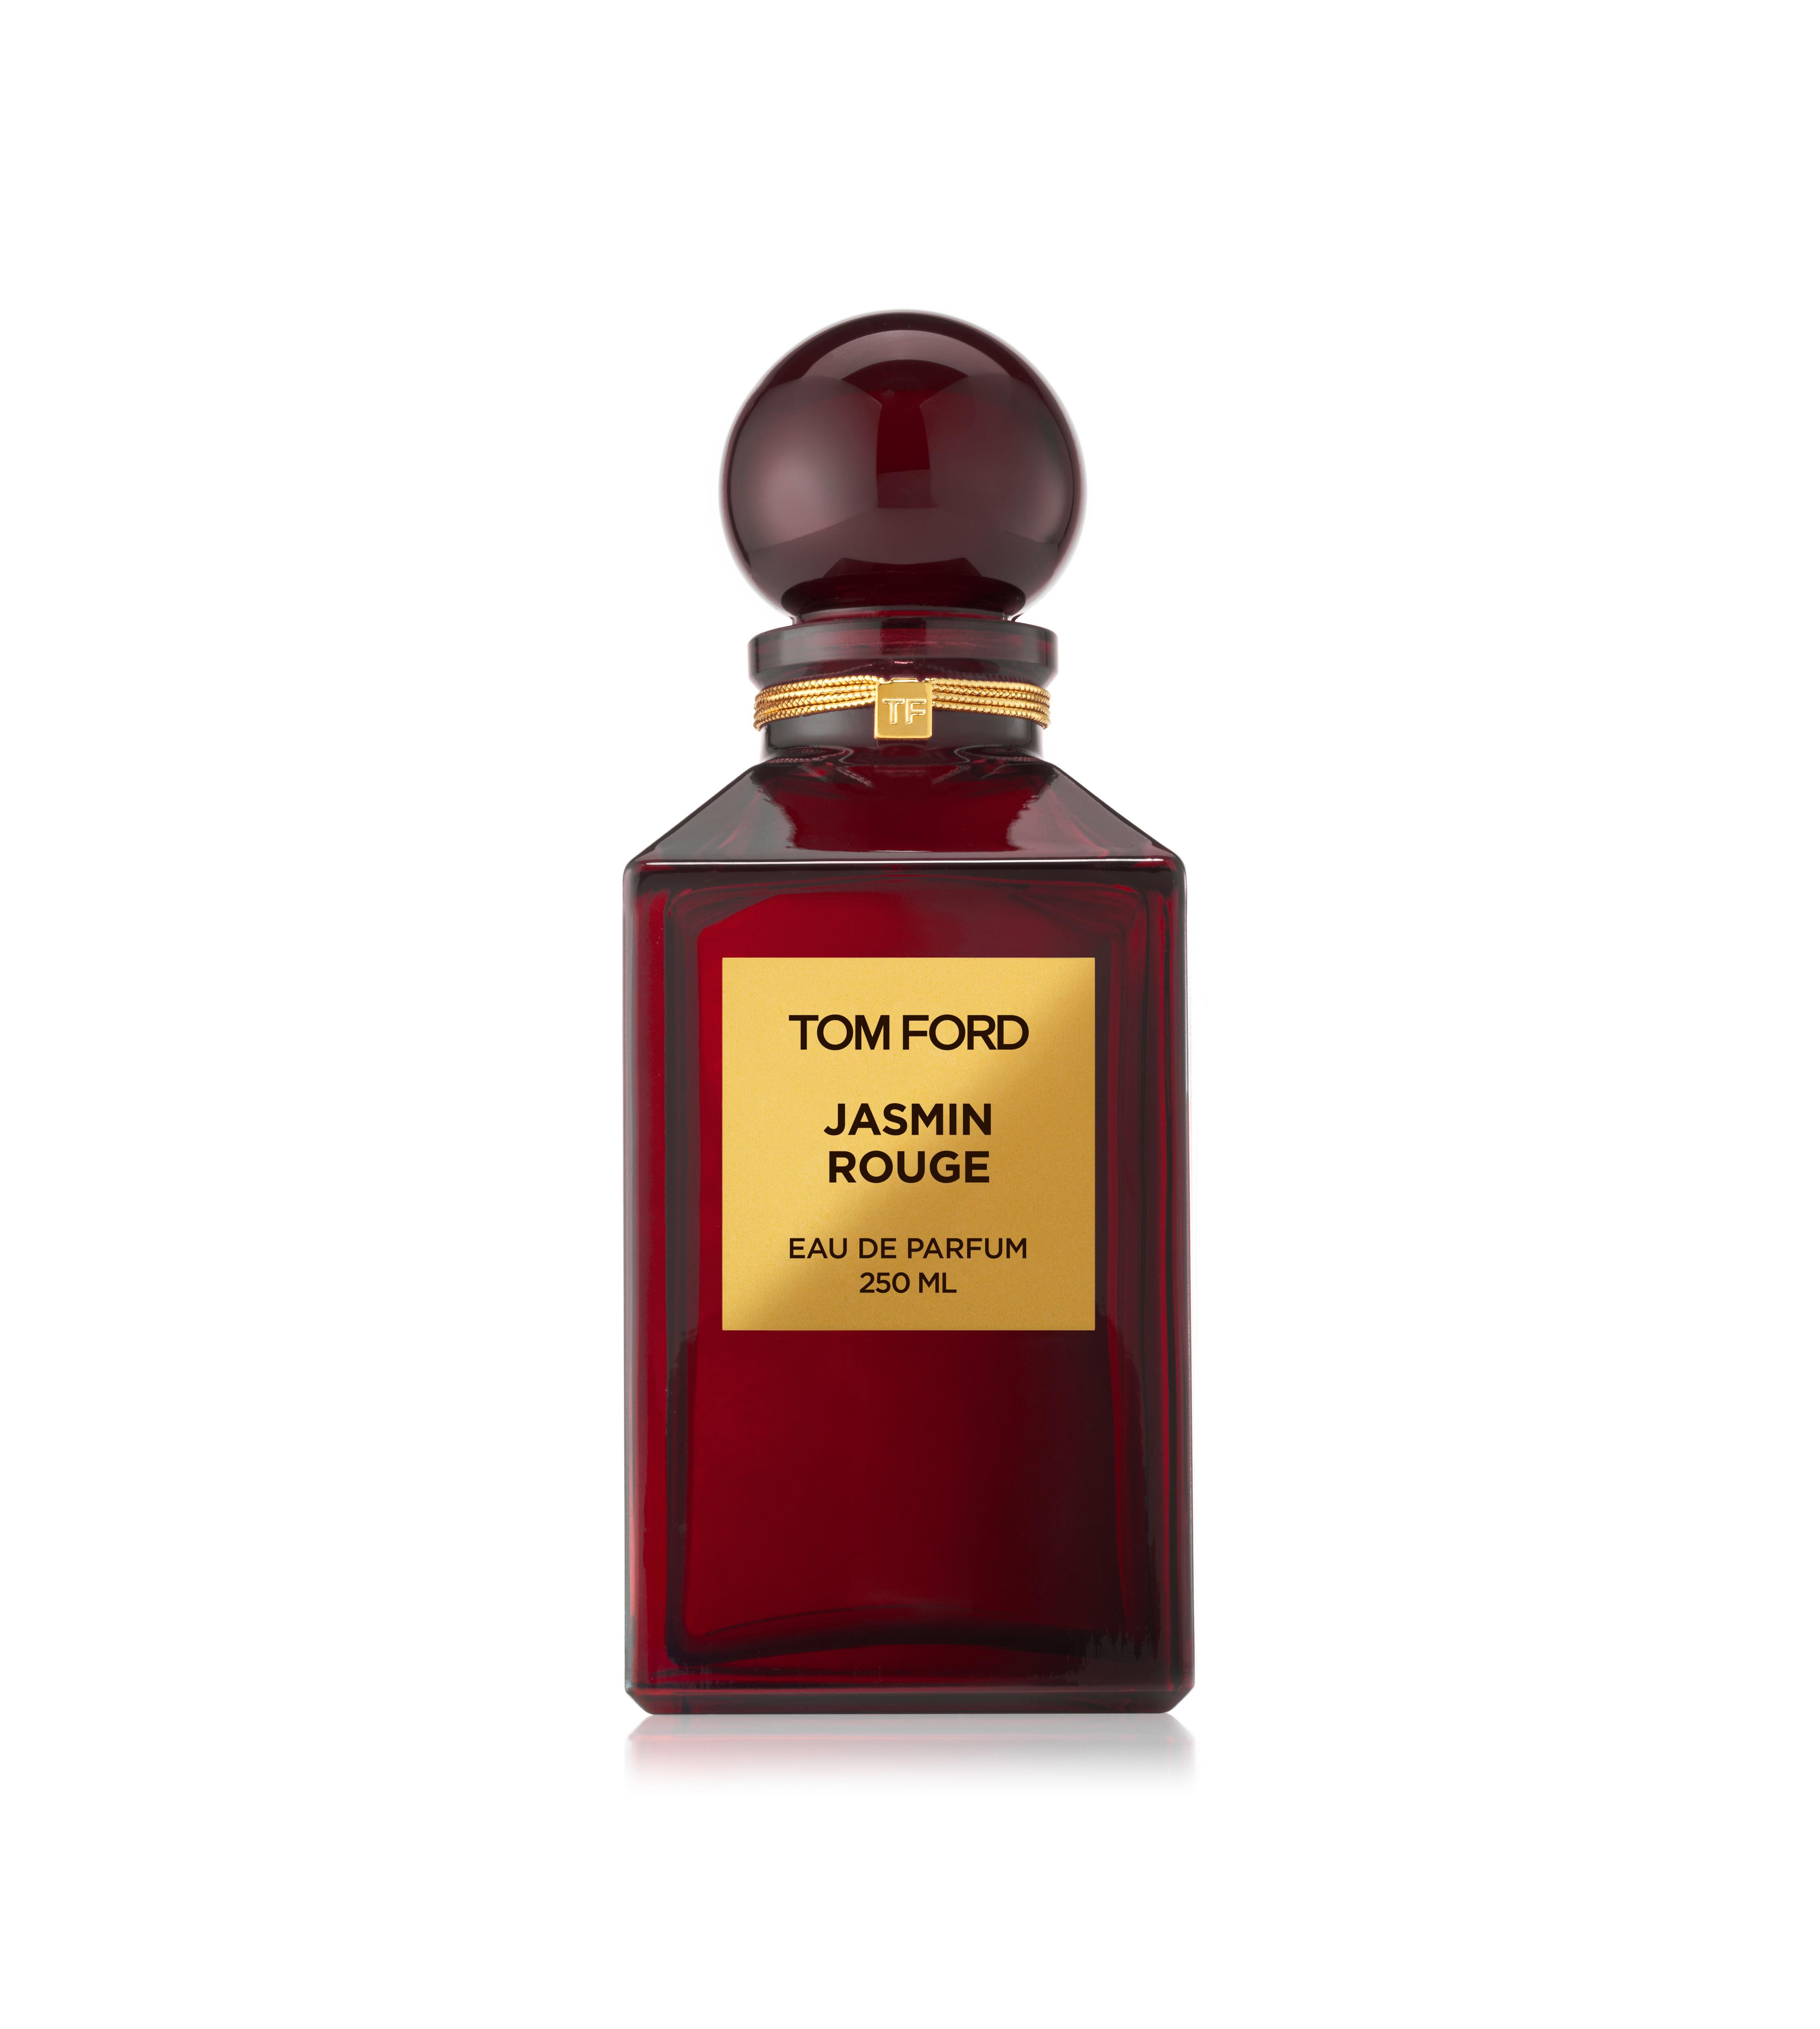 Perfume houses - Tom Ford • Scentertainer